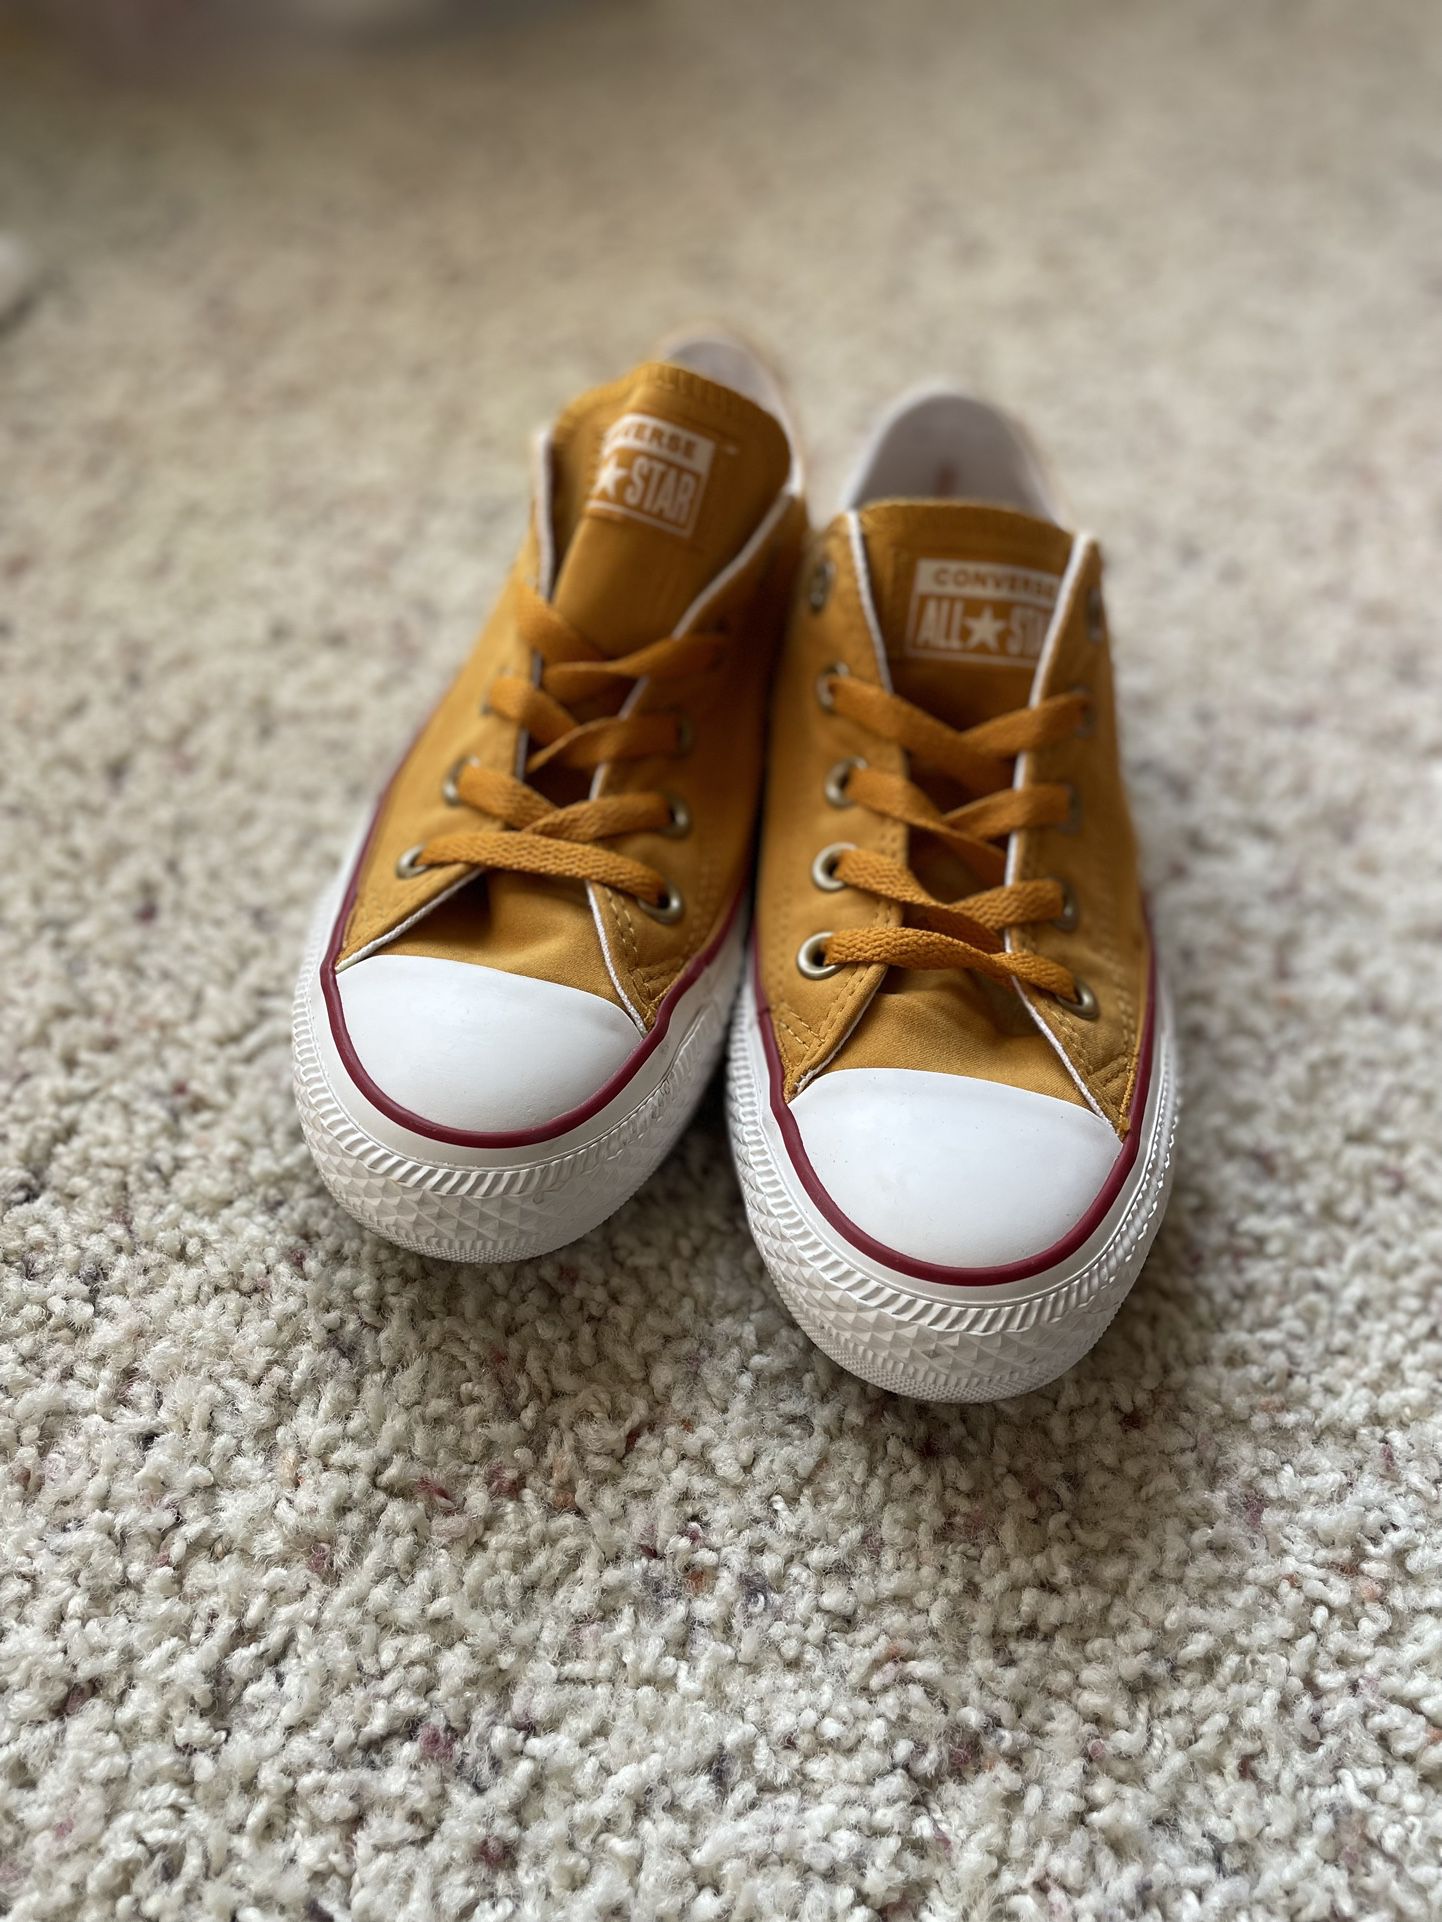 Converse Sneakers Size 6